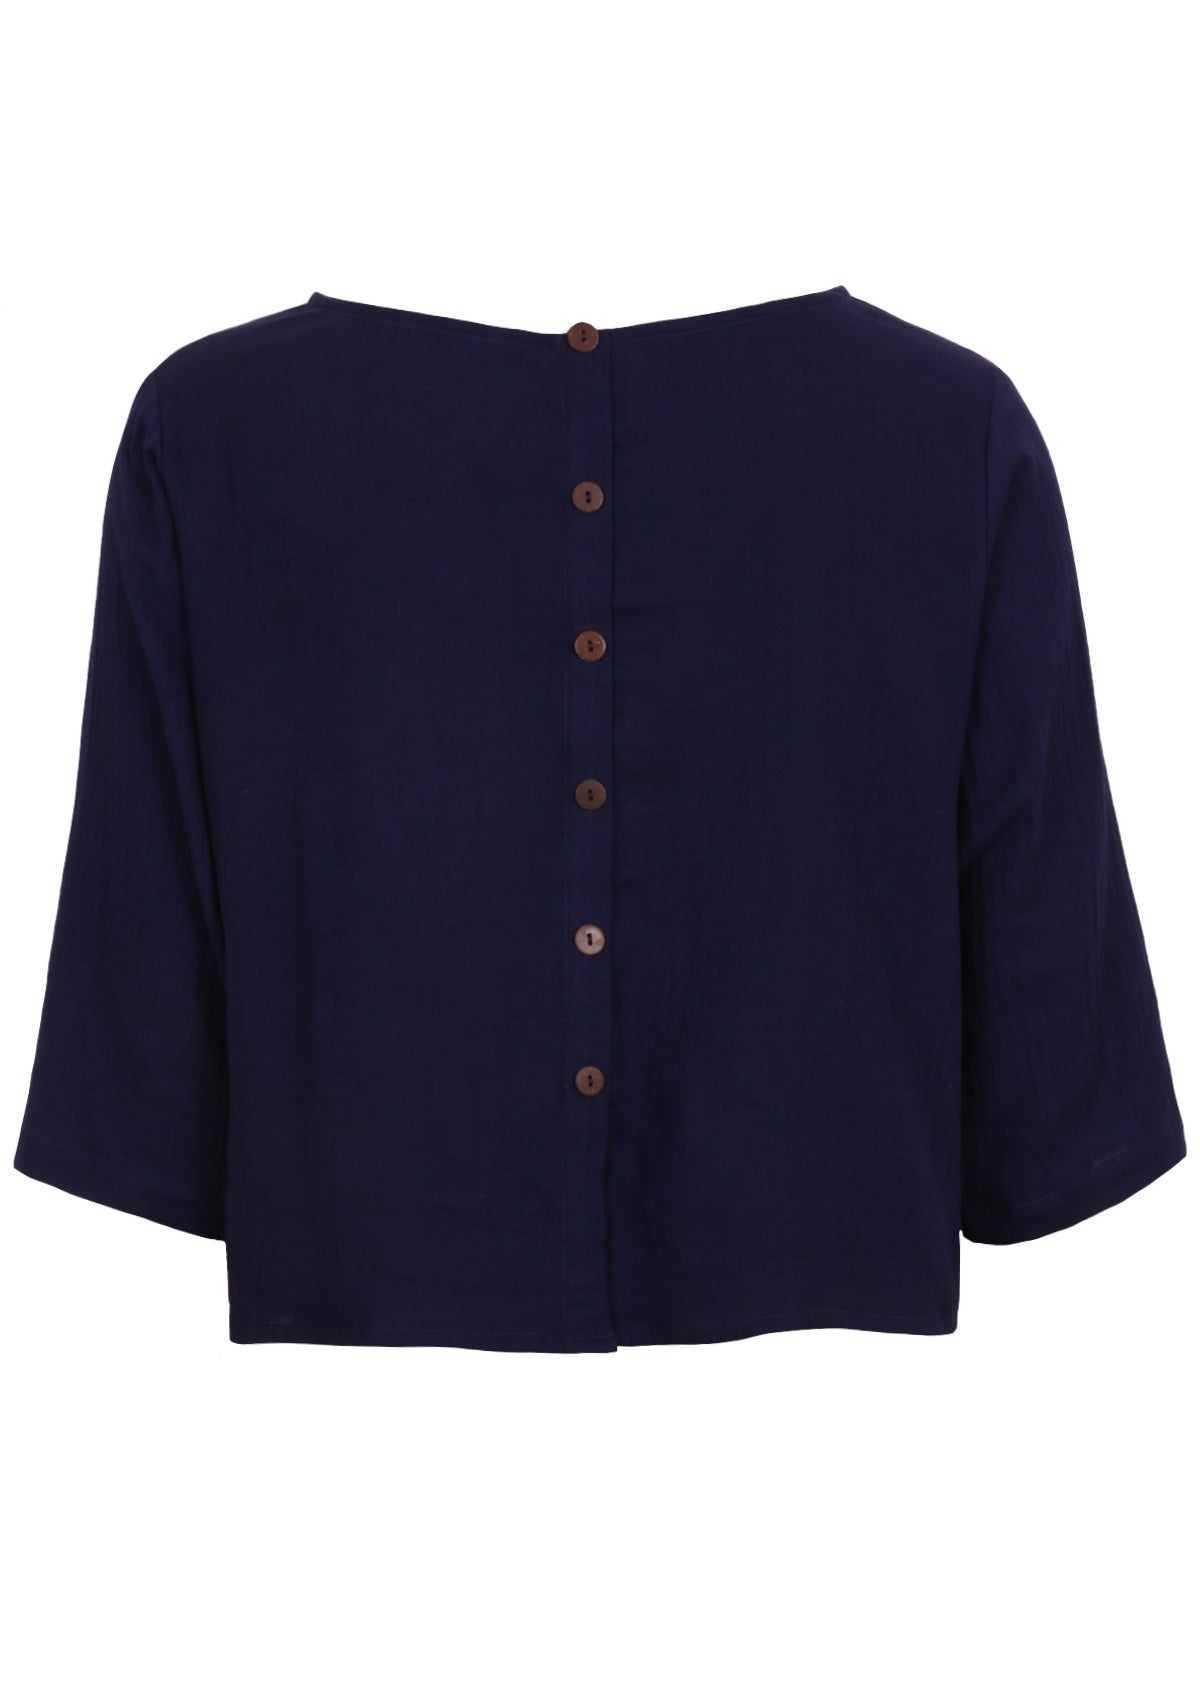 Double cotton 3/4 sleeve top with decorative buttons centre back